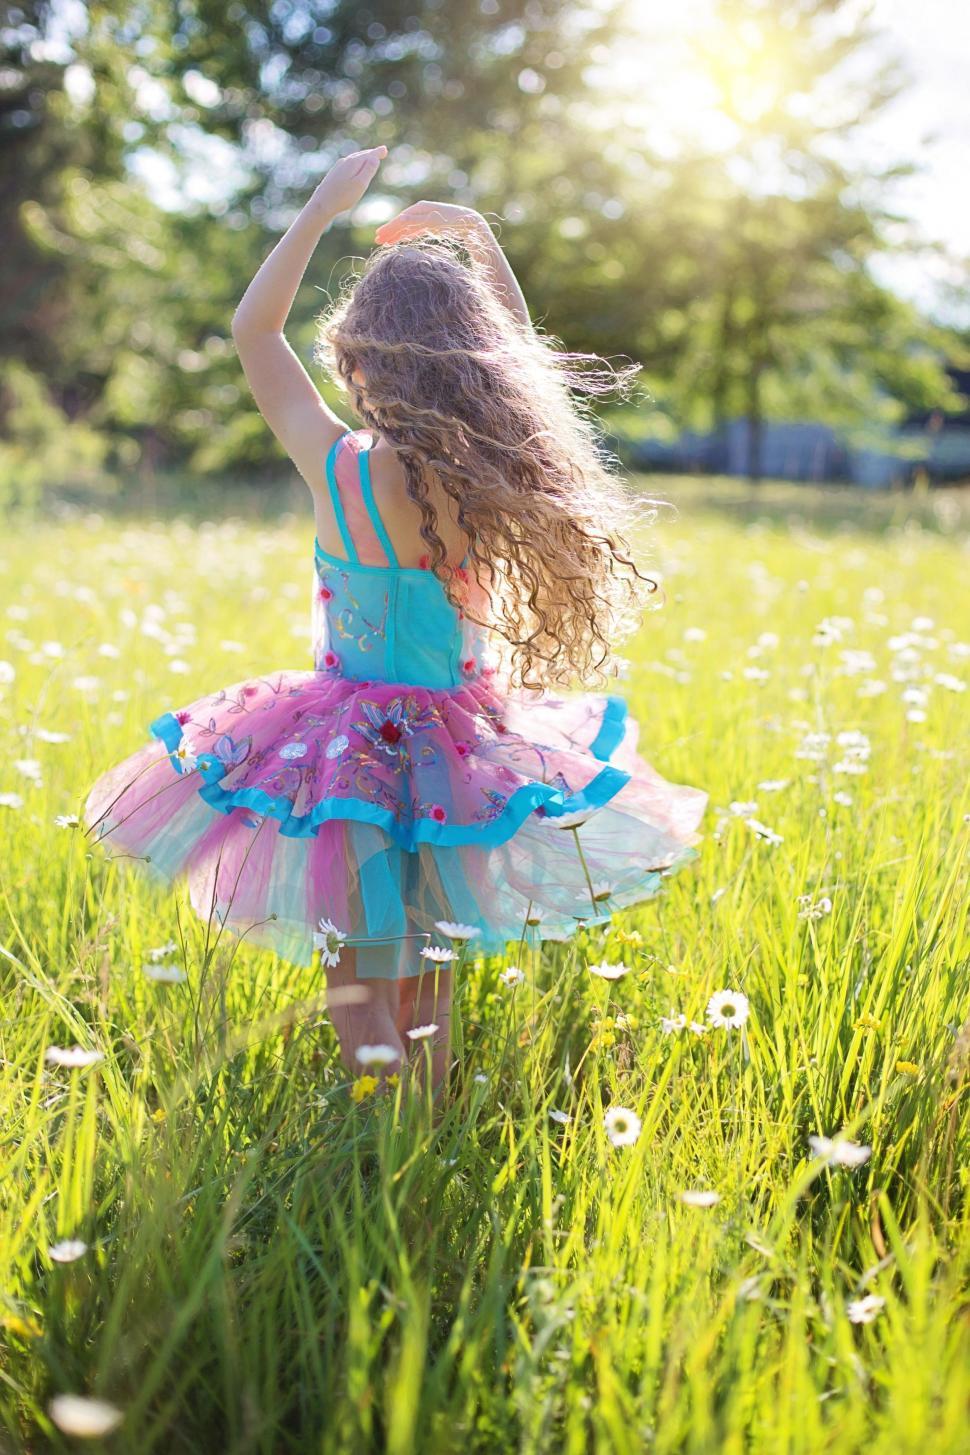 Free Image of Back view of little girl dancing in flower field 